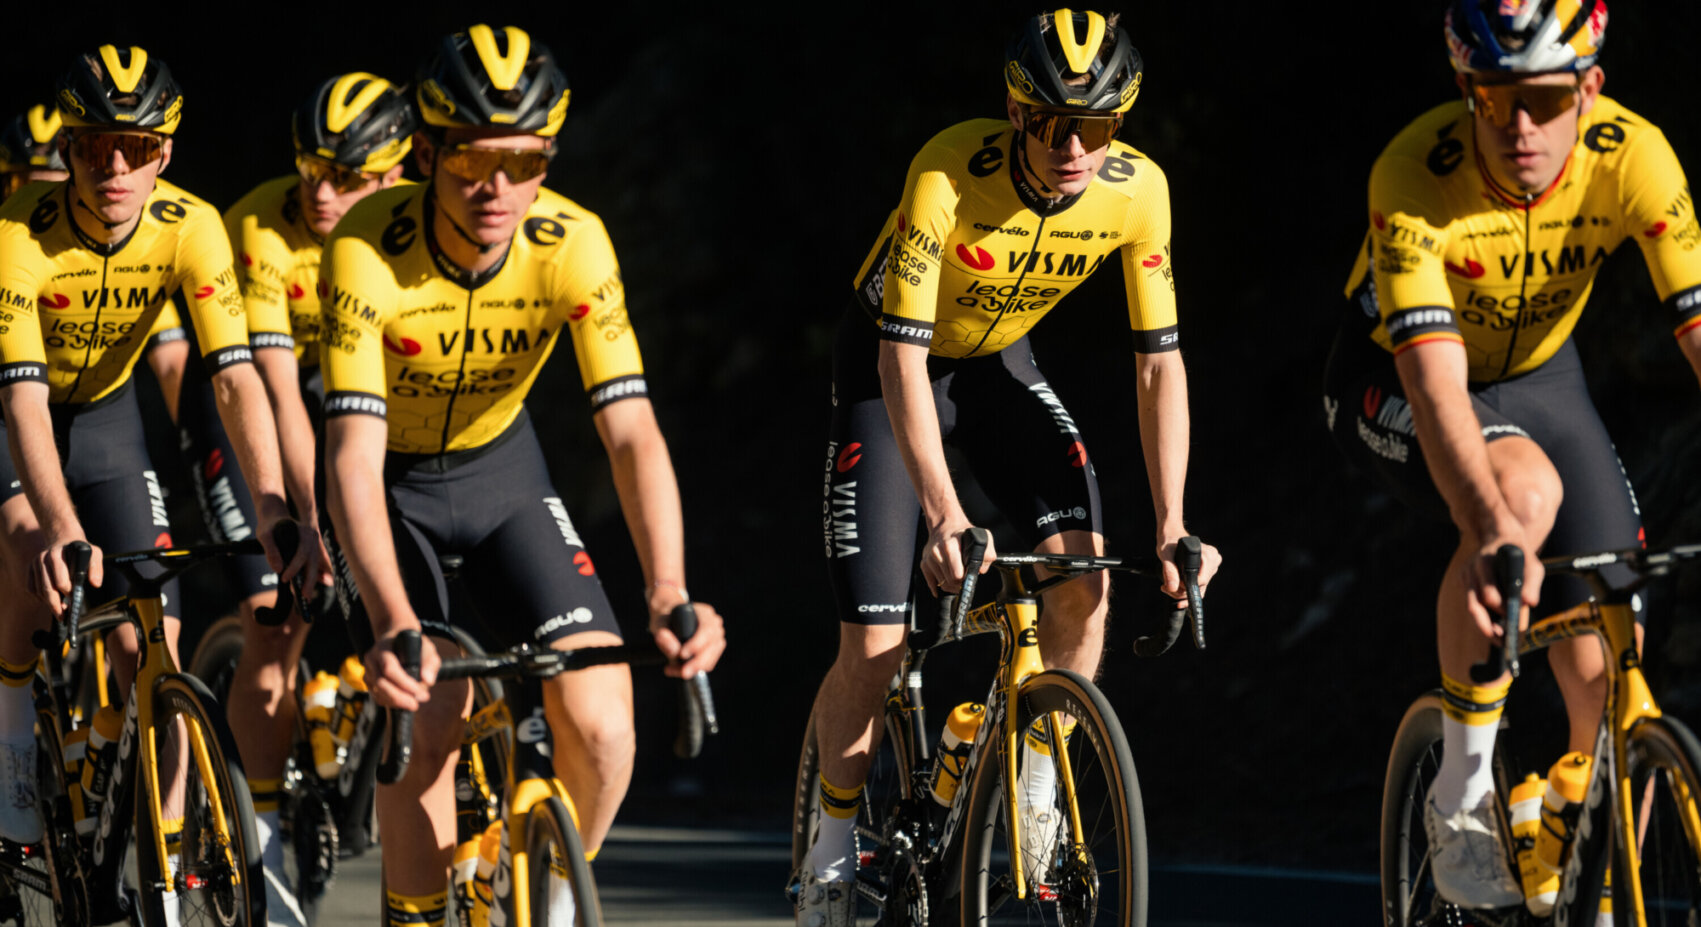 Team Visma | Lease a Bike aims to make history again in 2024 after historic 2023	